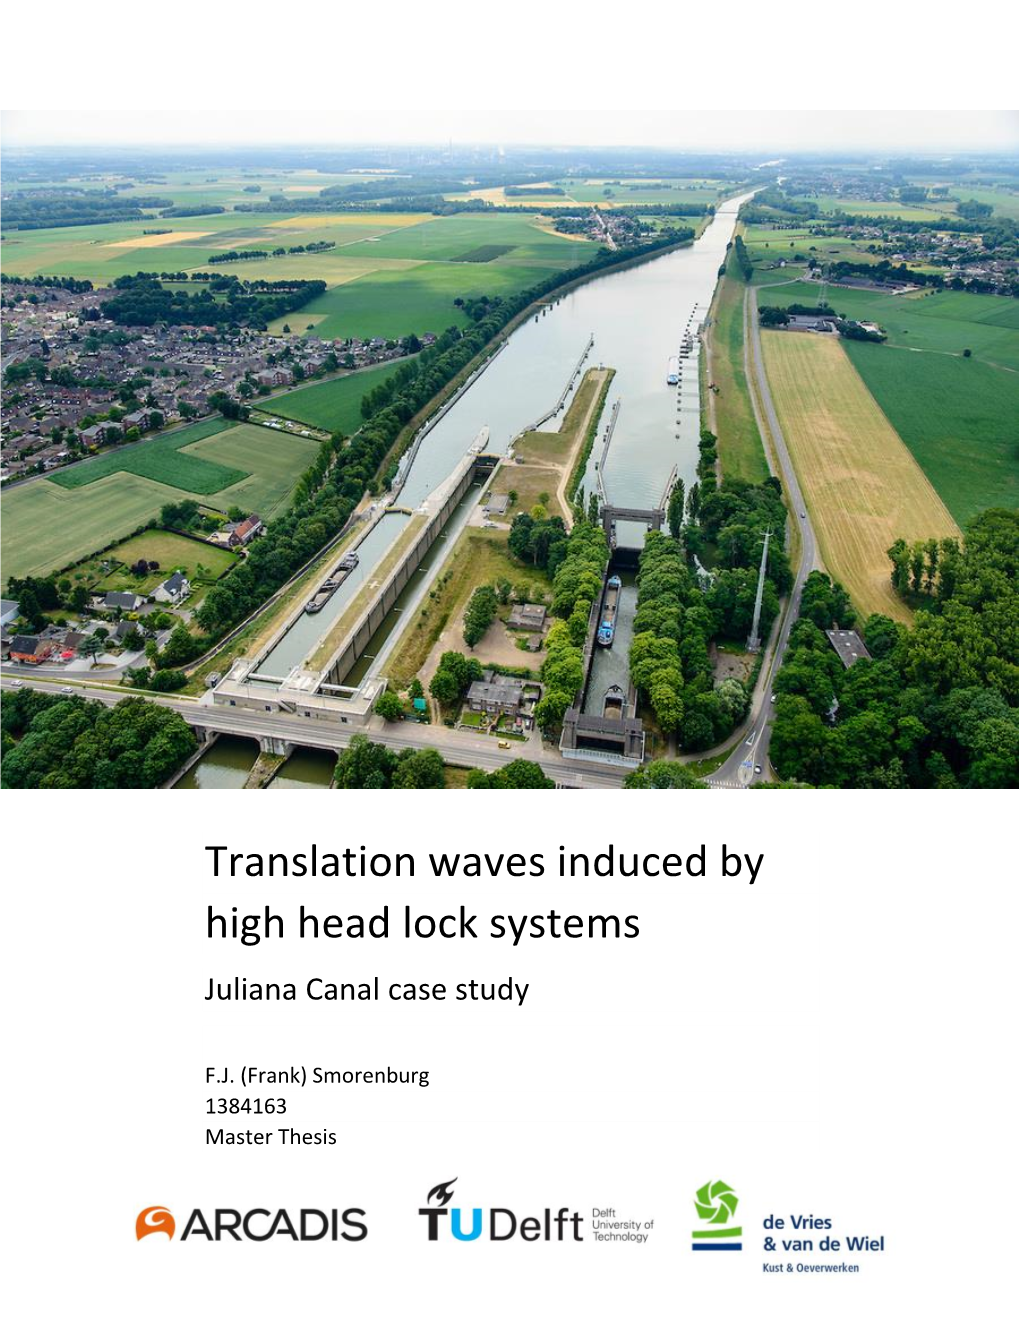 Translation Waves Induced by High Head Lock Systems Juliana Canal Case Study